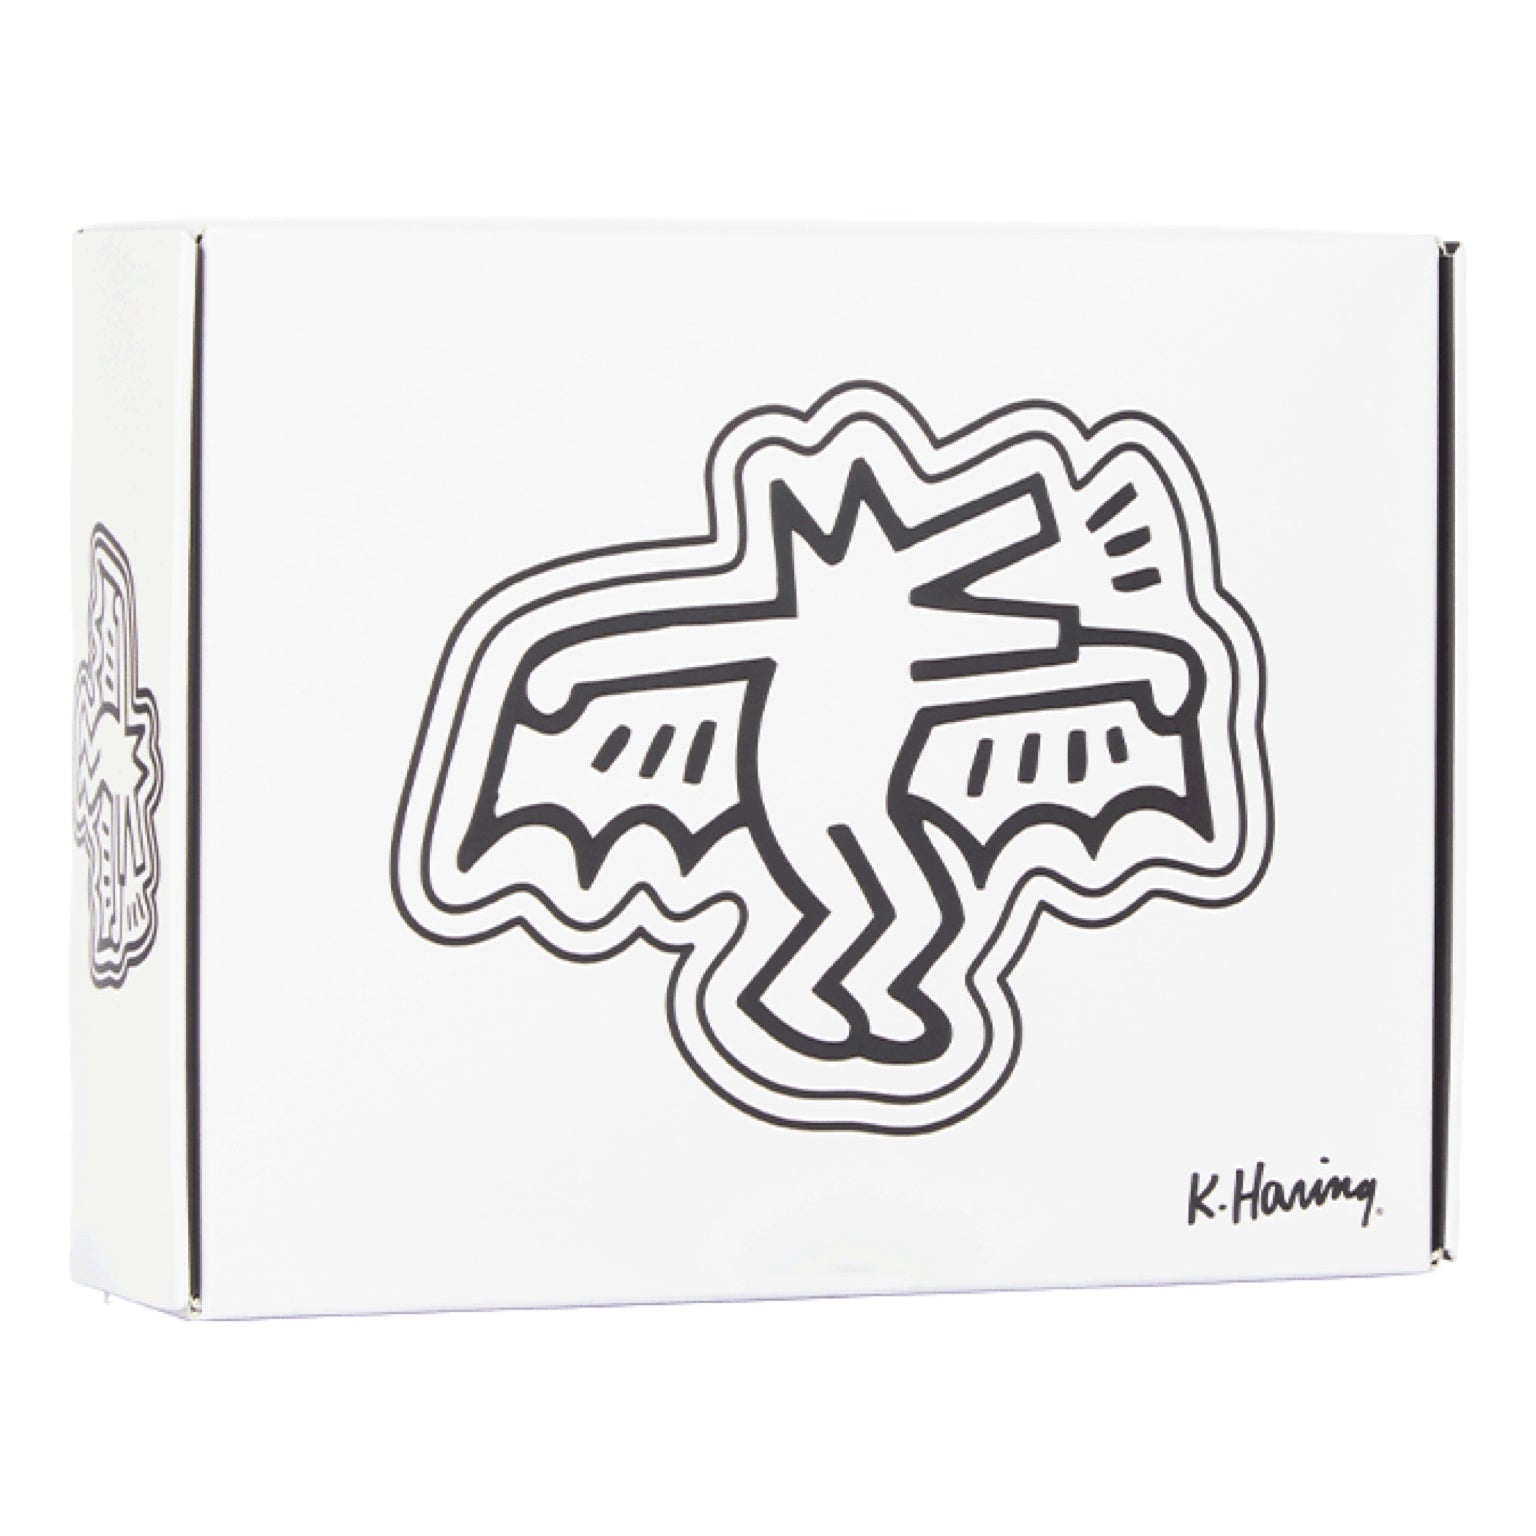 K. Haring “Dog Bat” Crystal Glass Catchall by K. Haring Collection | Mission Dispensary